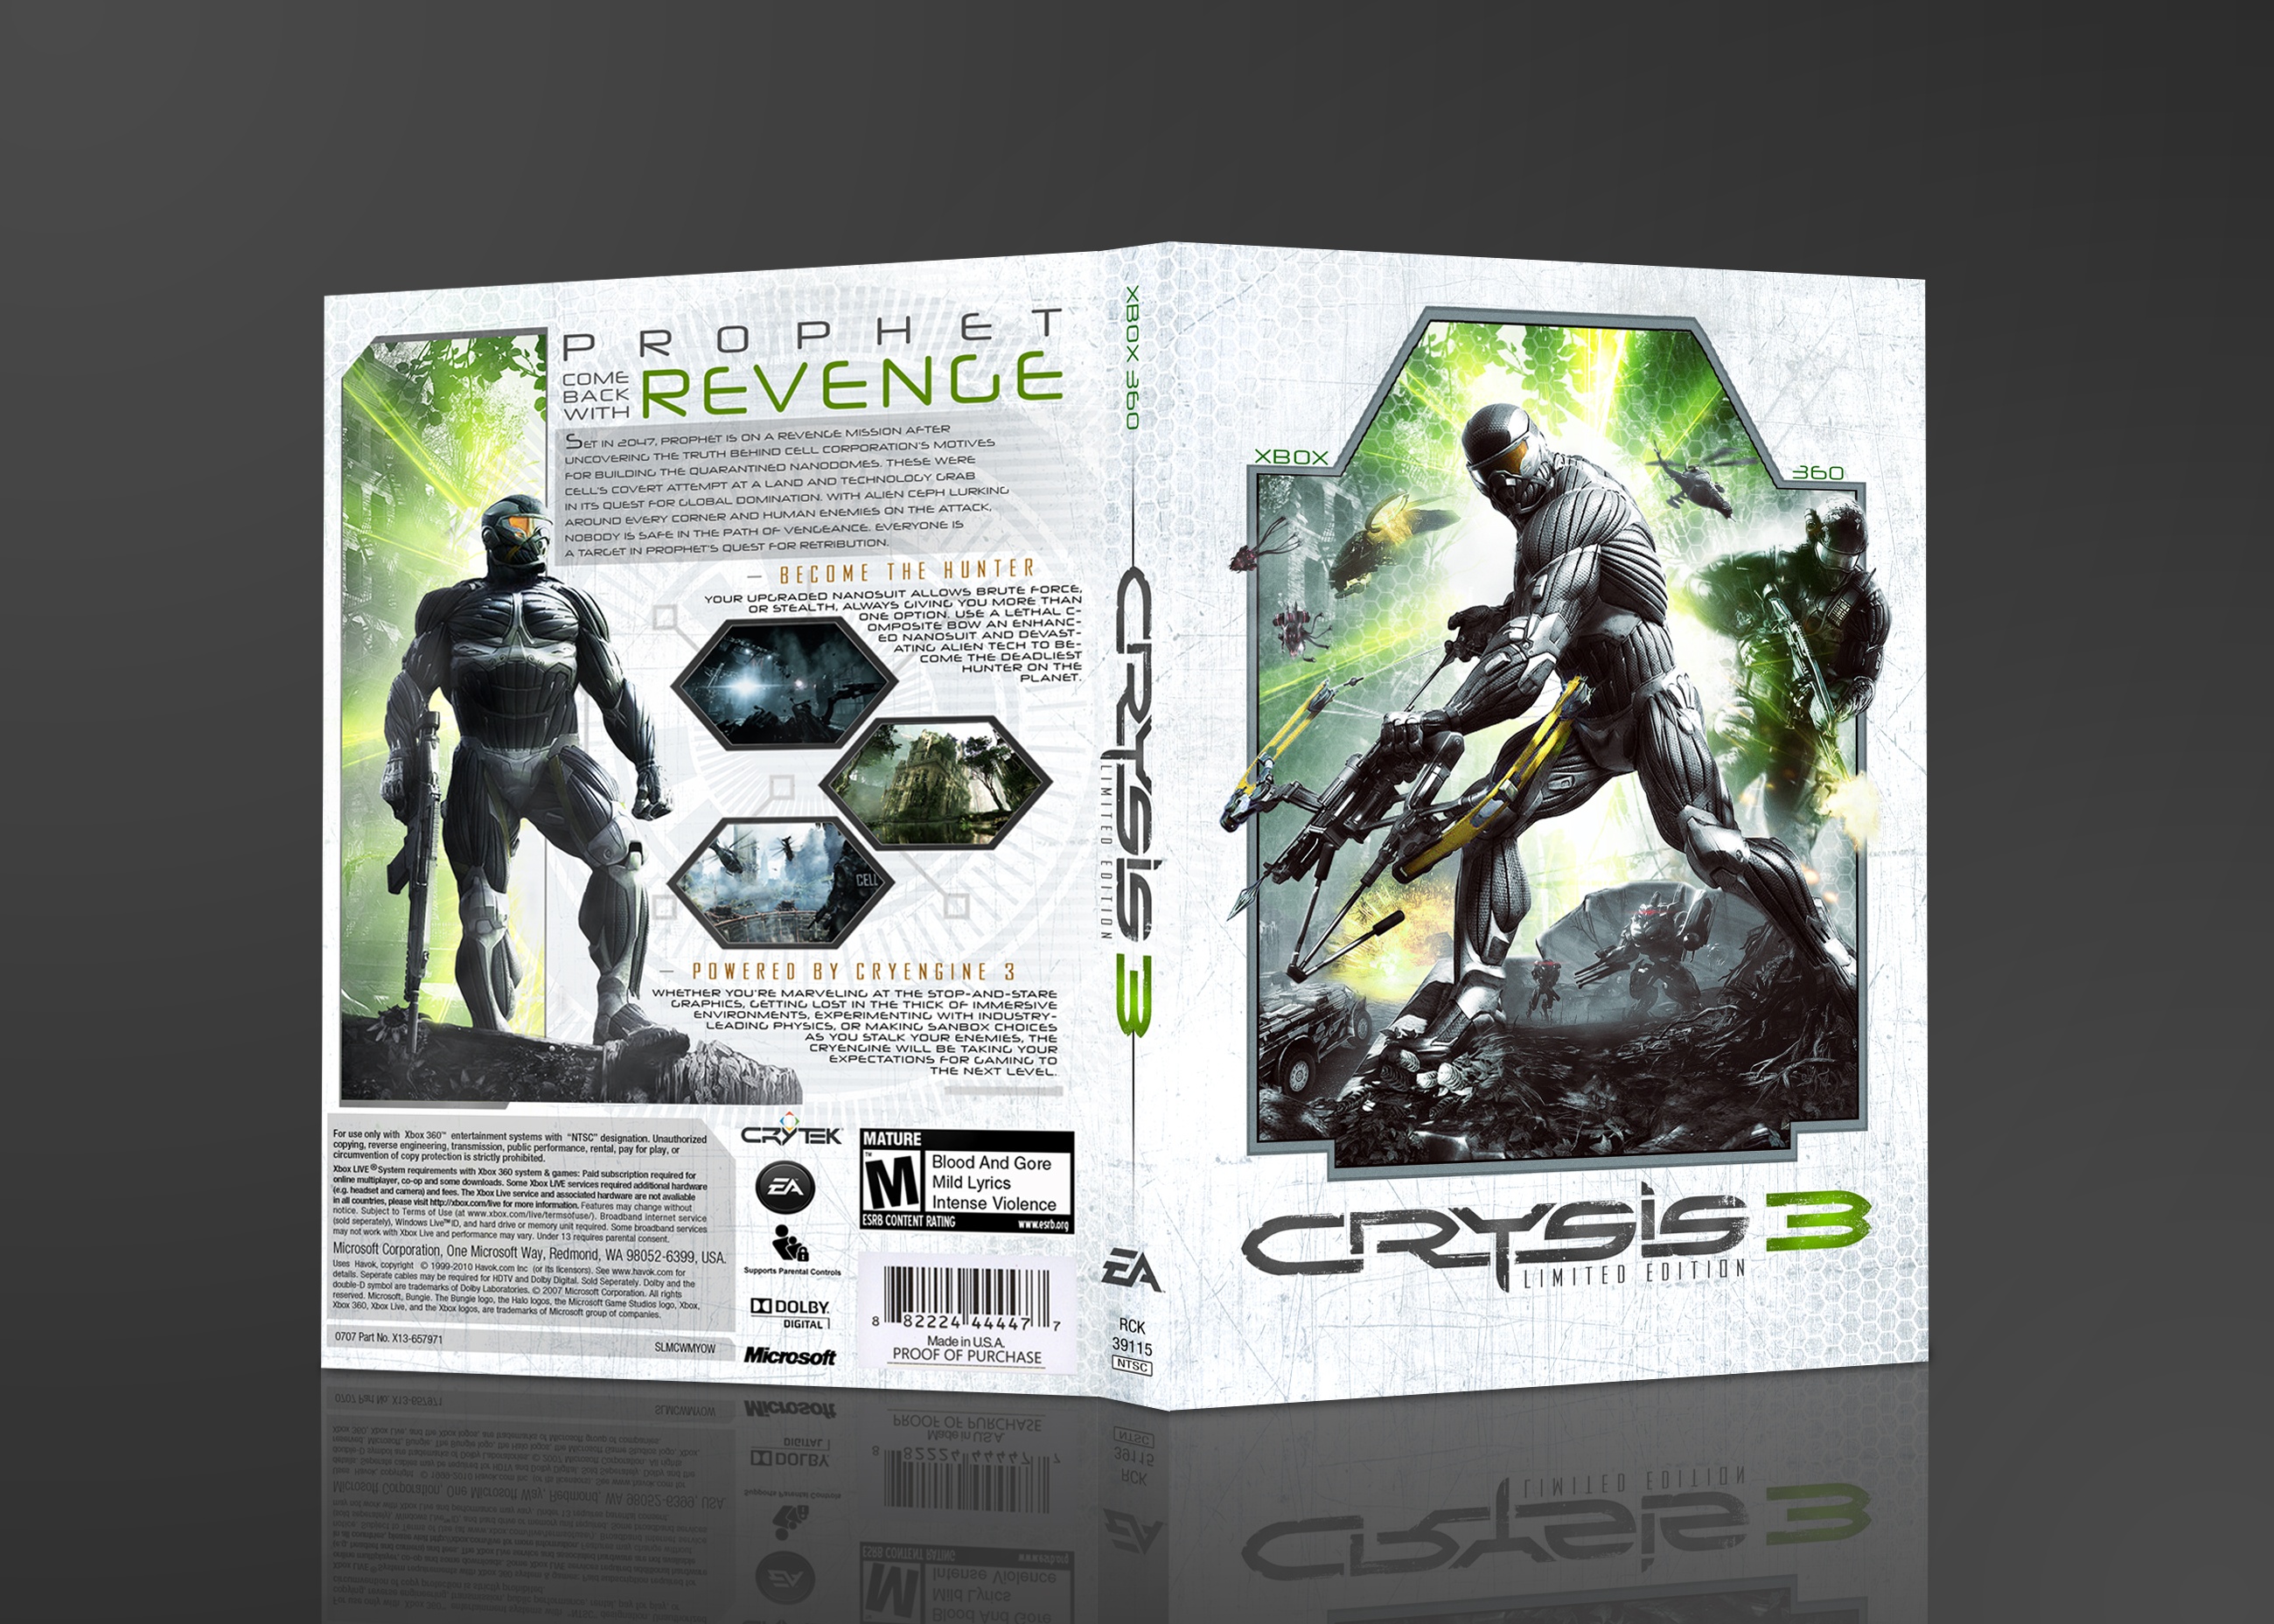 Crysis 3 Limited Edition box cover